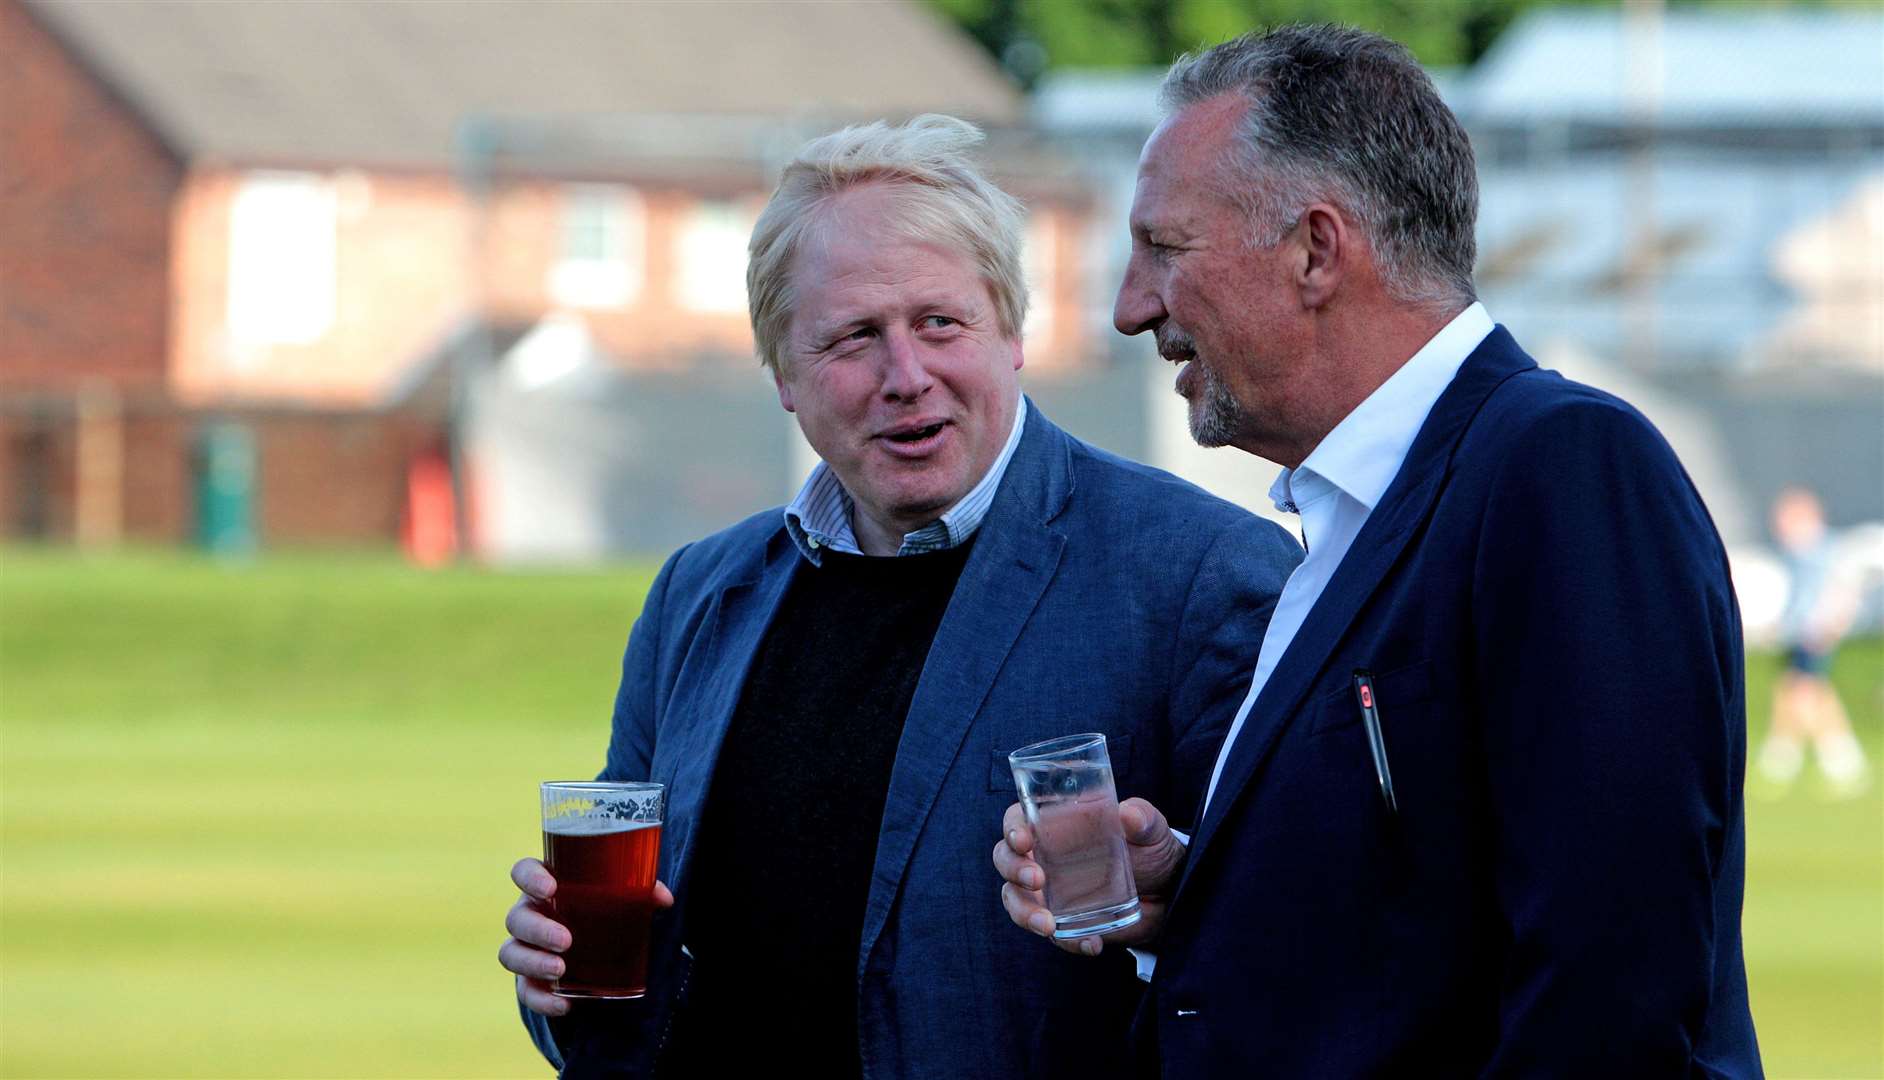 Boris Johnson talking to former England cricketer Sir Ian Botham who has been nominated for a peerage (Peter Byrne/PA)